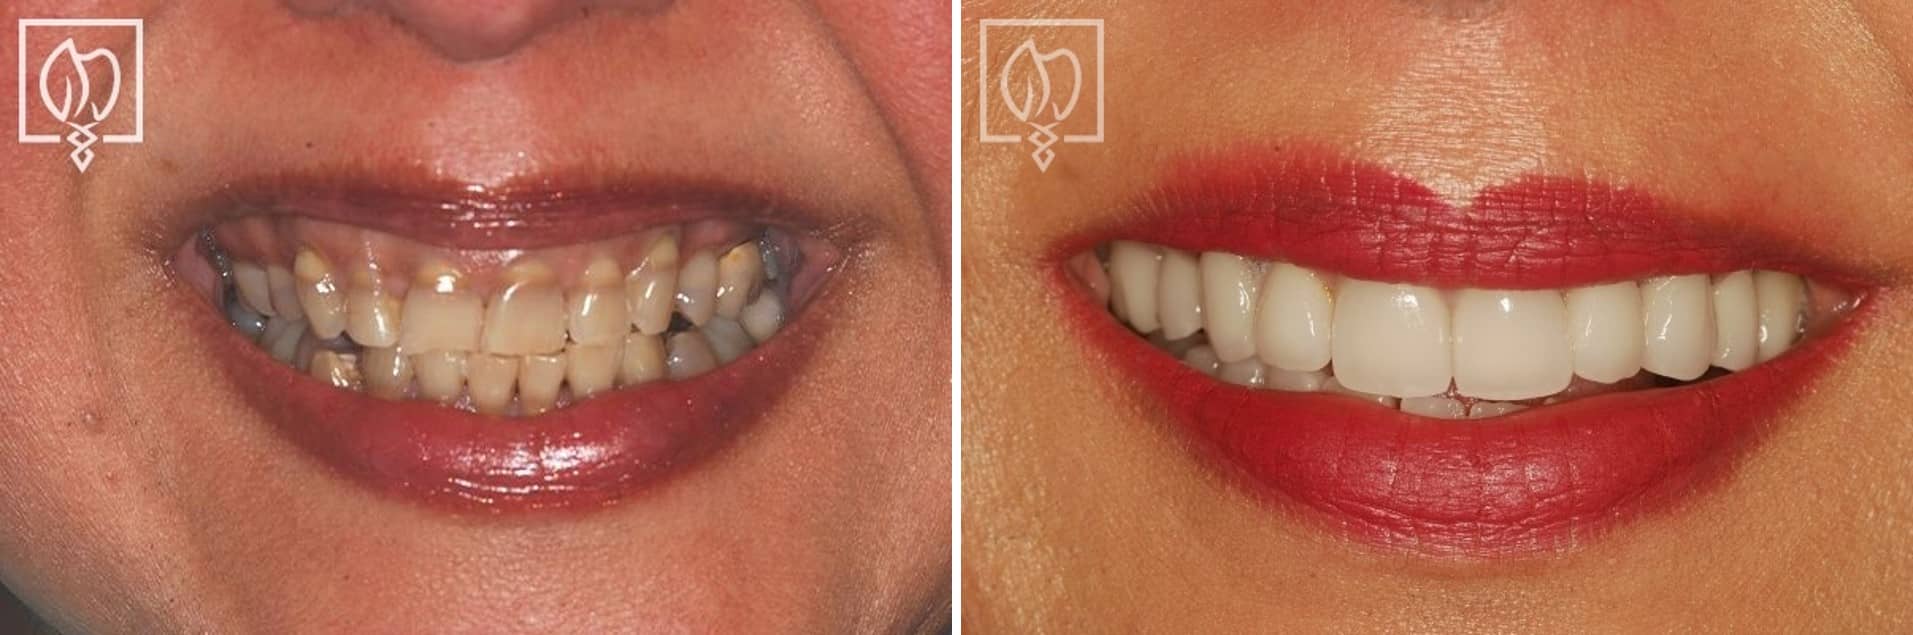 dental-crown-smile-makeovers-discolored-teeth-transformations-dental-crowns-severely-discolored-dentition--5843 before after